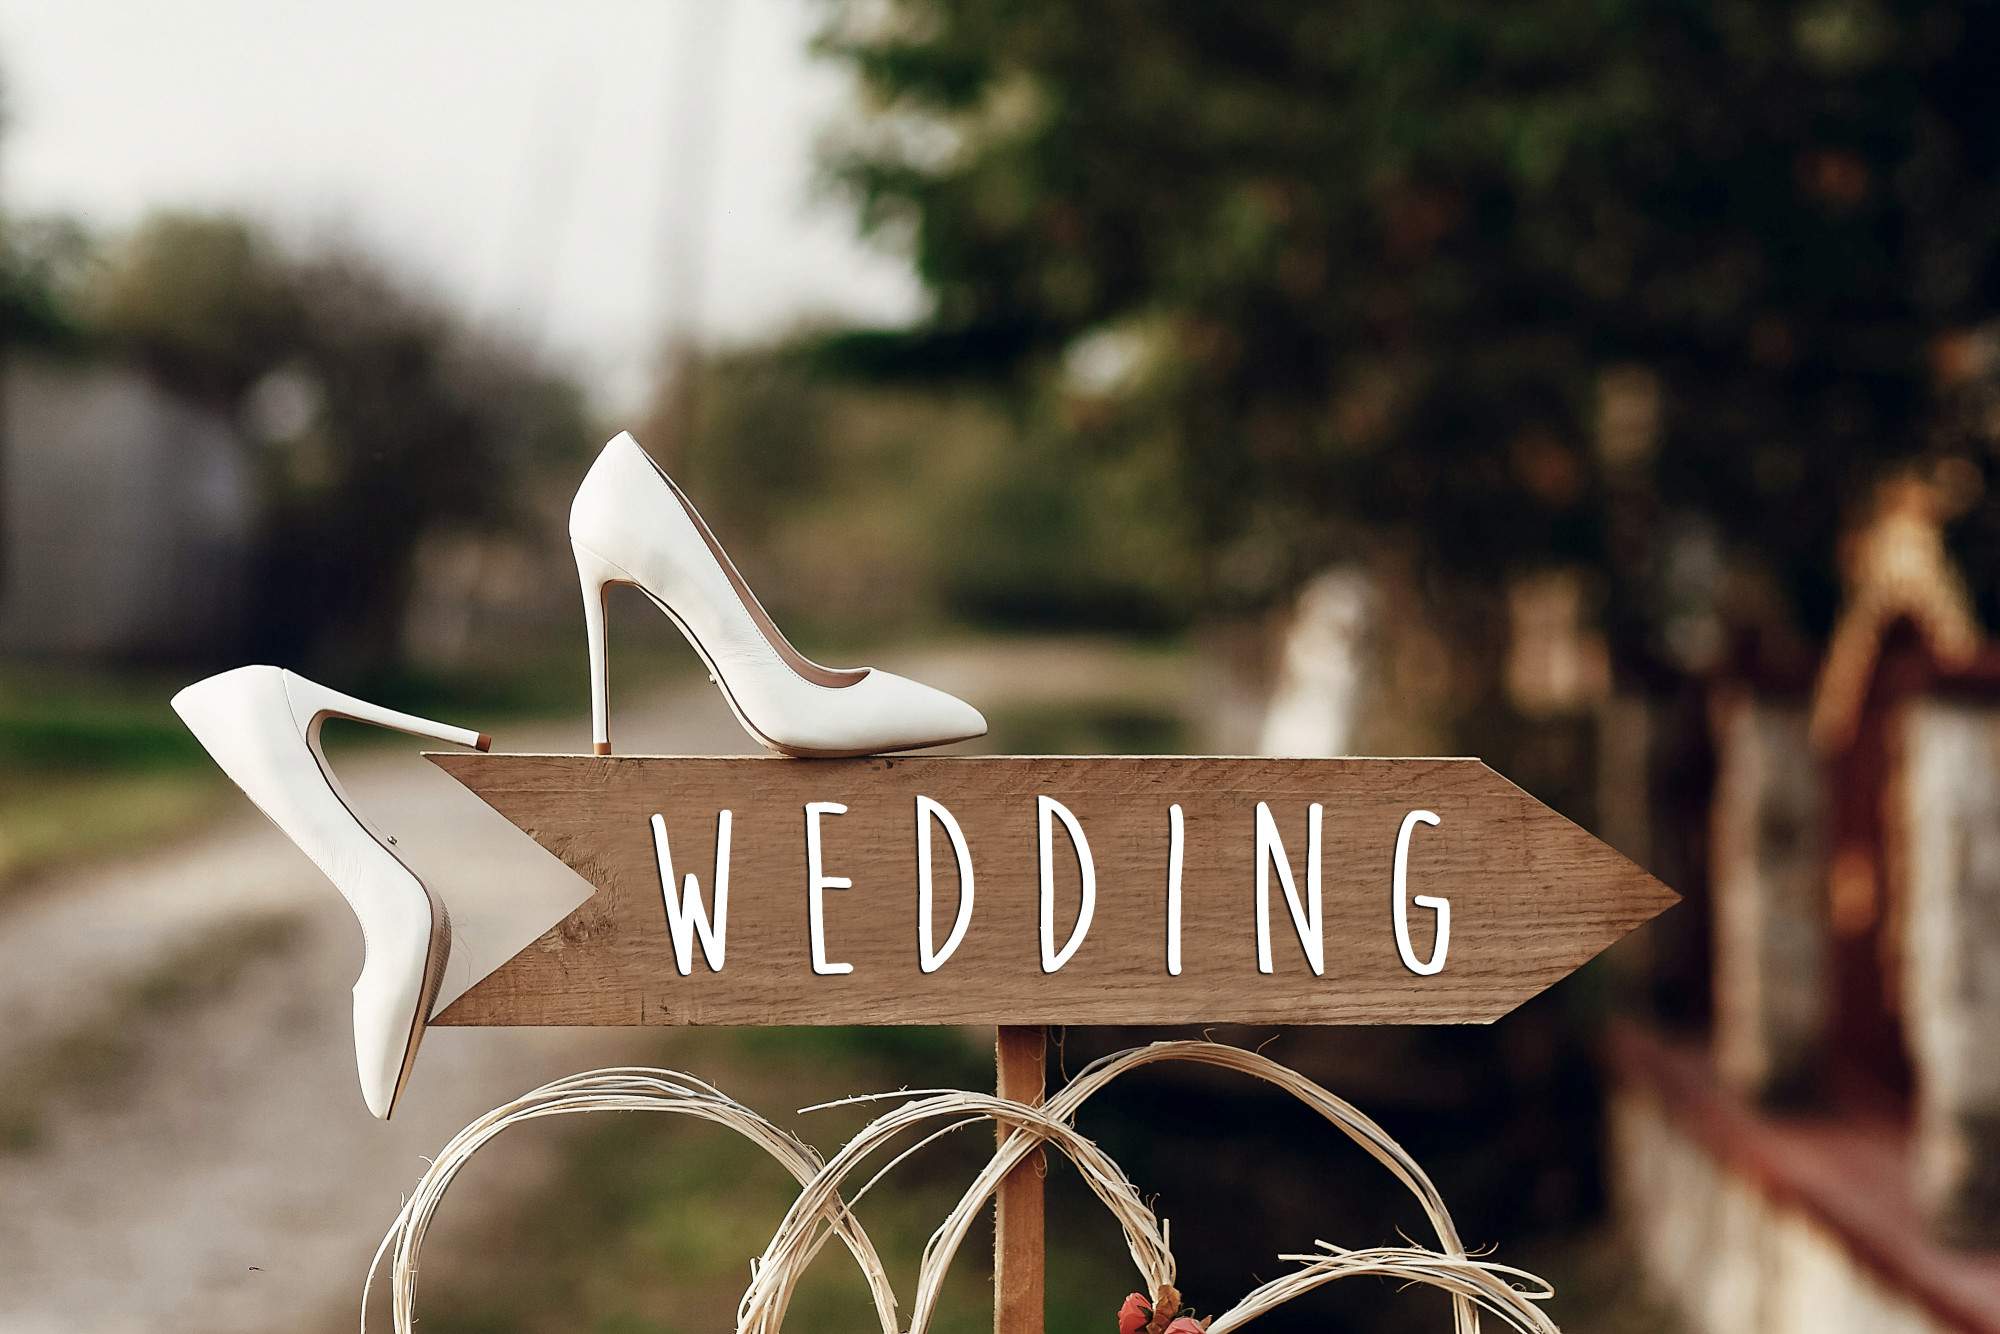 How to Choose a Wedding Venue: Tips for Finding ”The One”